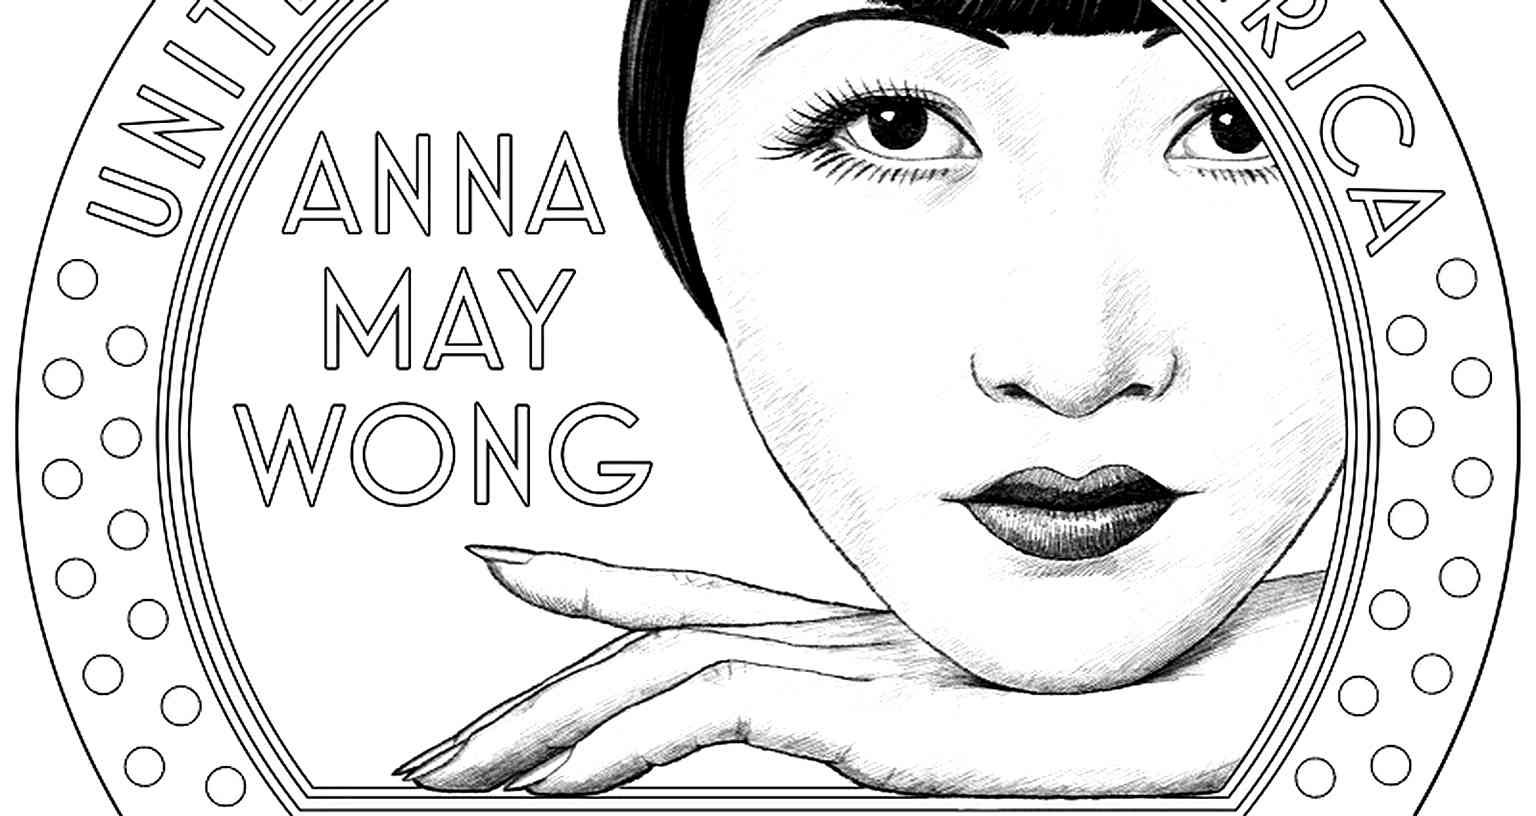 Chinese American acting legend Anna May Wong to be featured on new US quarters for 2022